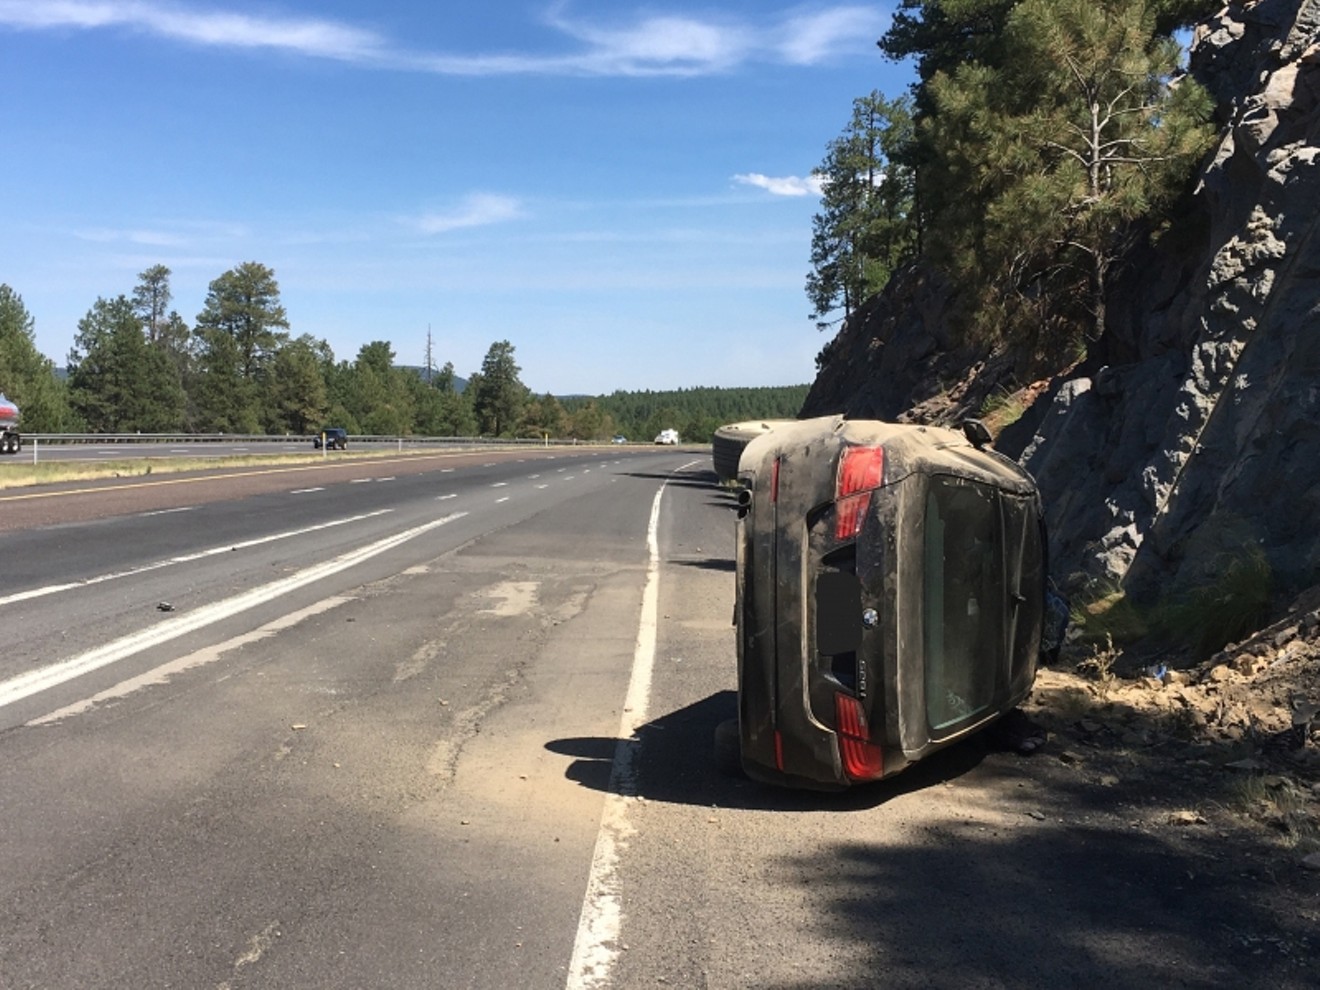 The BMW which a naked man rolled near Flagstaff on I-17 on Sunday, June 18, 2017.